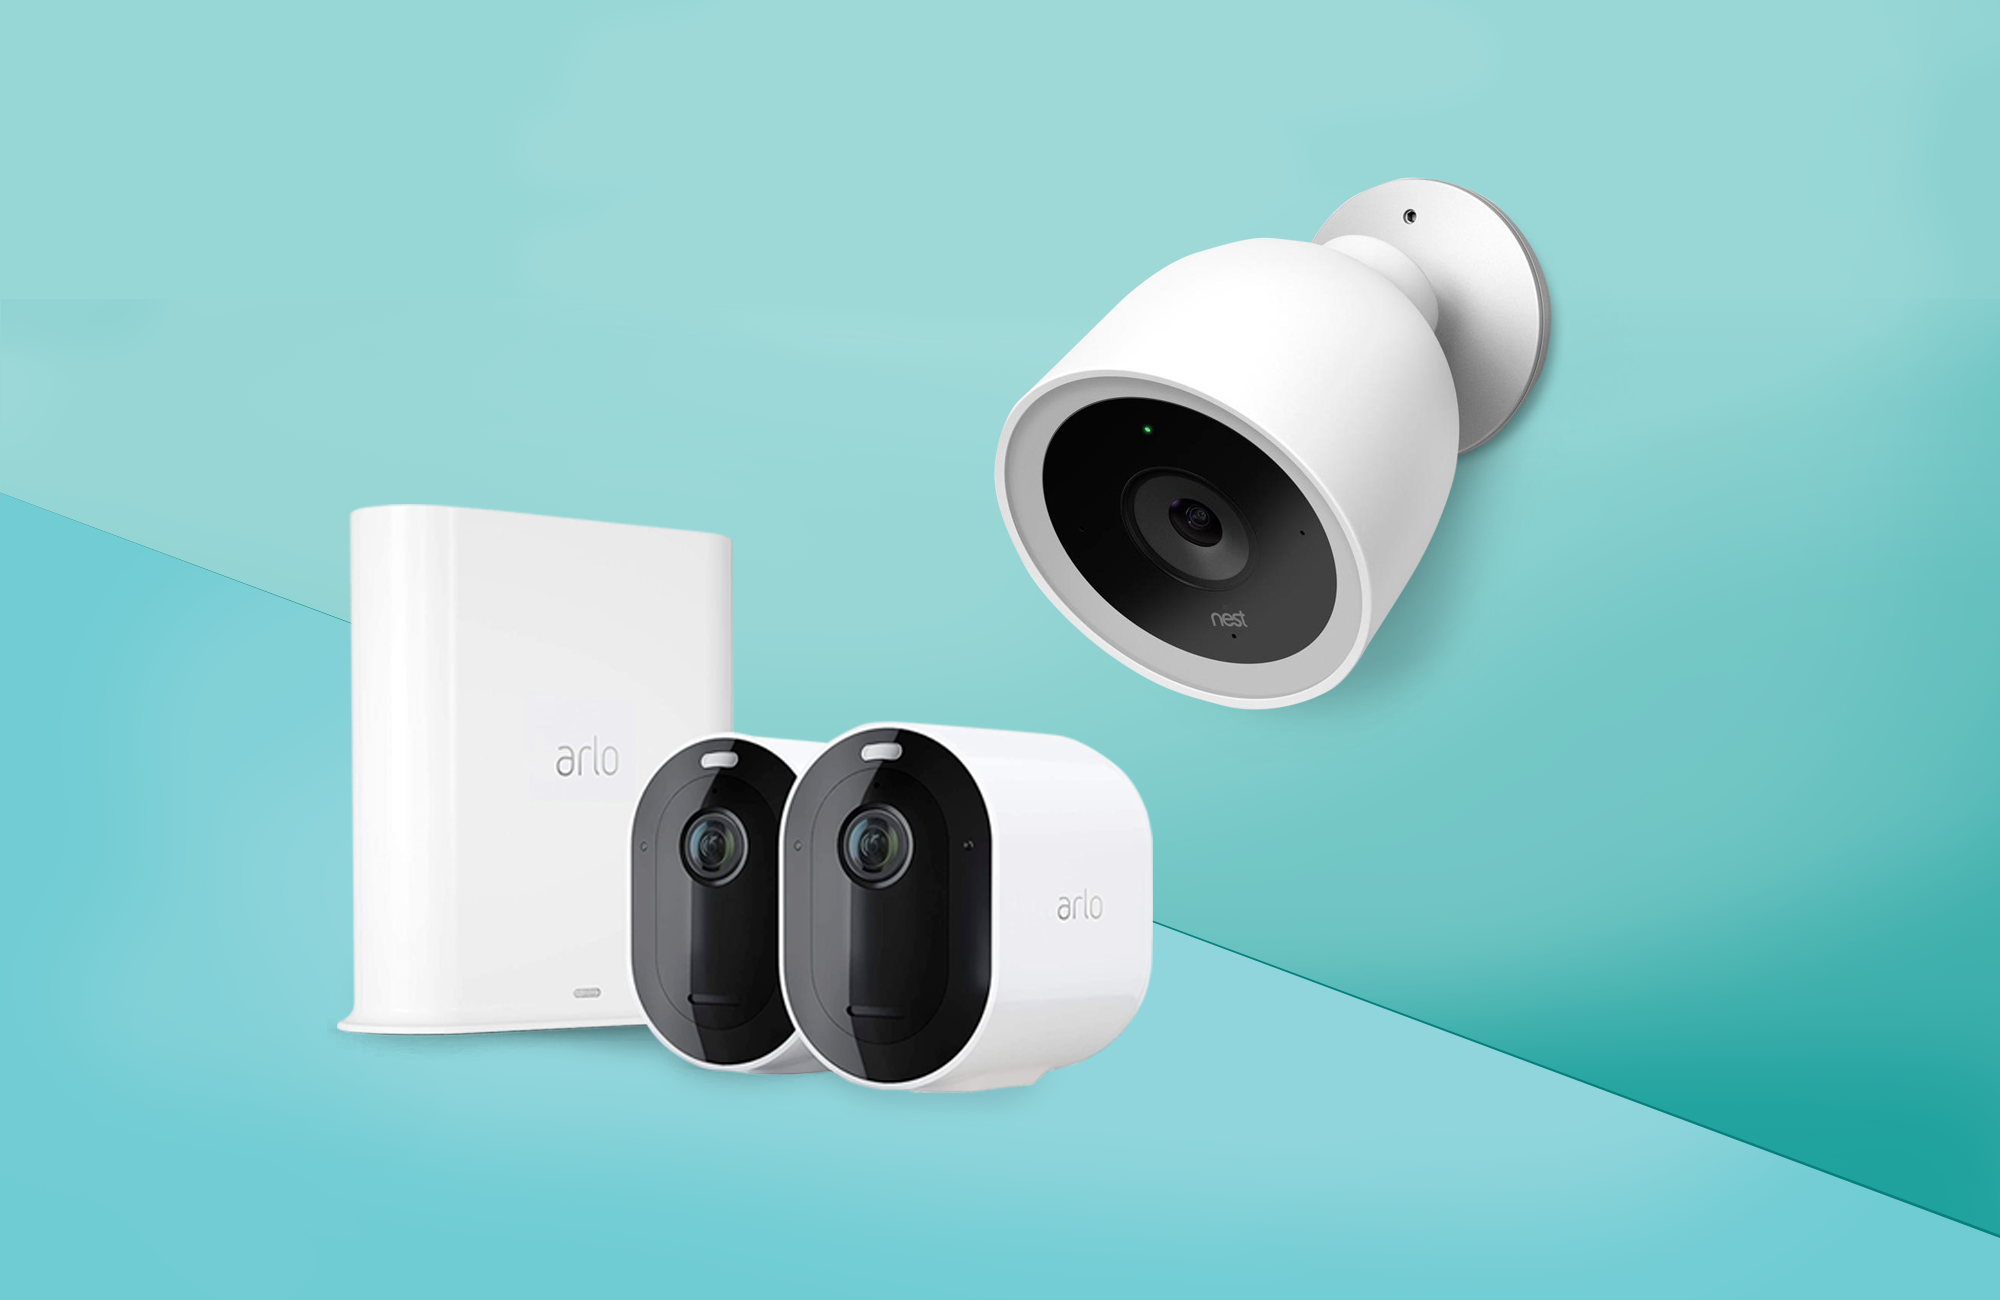 https://hips.hearstapps.com/hmg-prod.s3.amazonaws.com/images/gh-best-home-security-cameras-1588262479.png